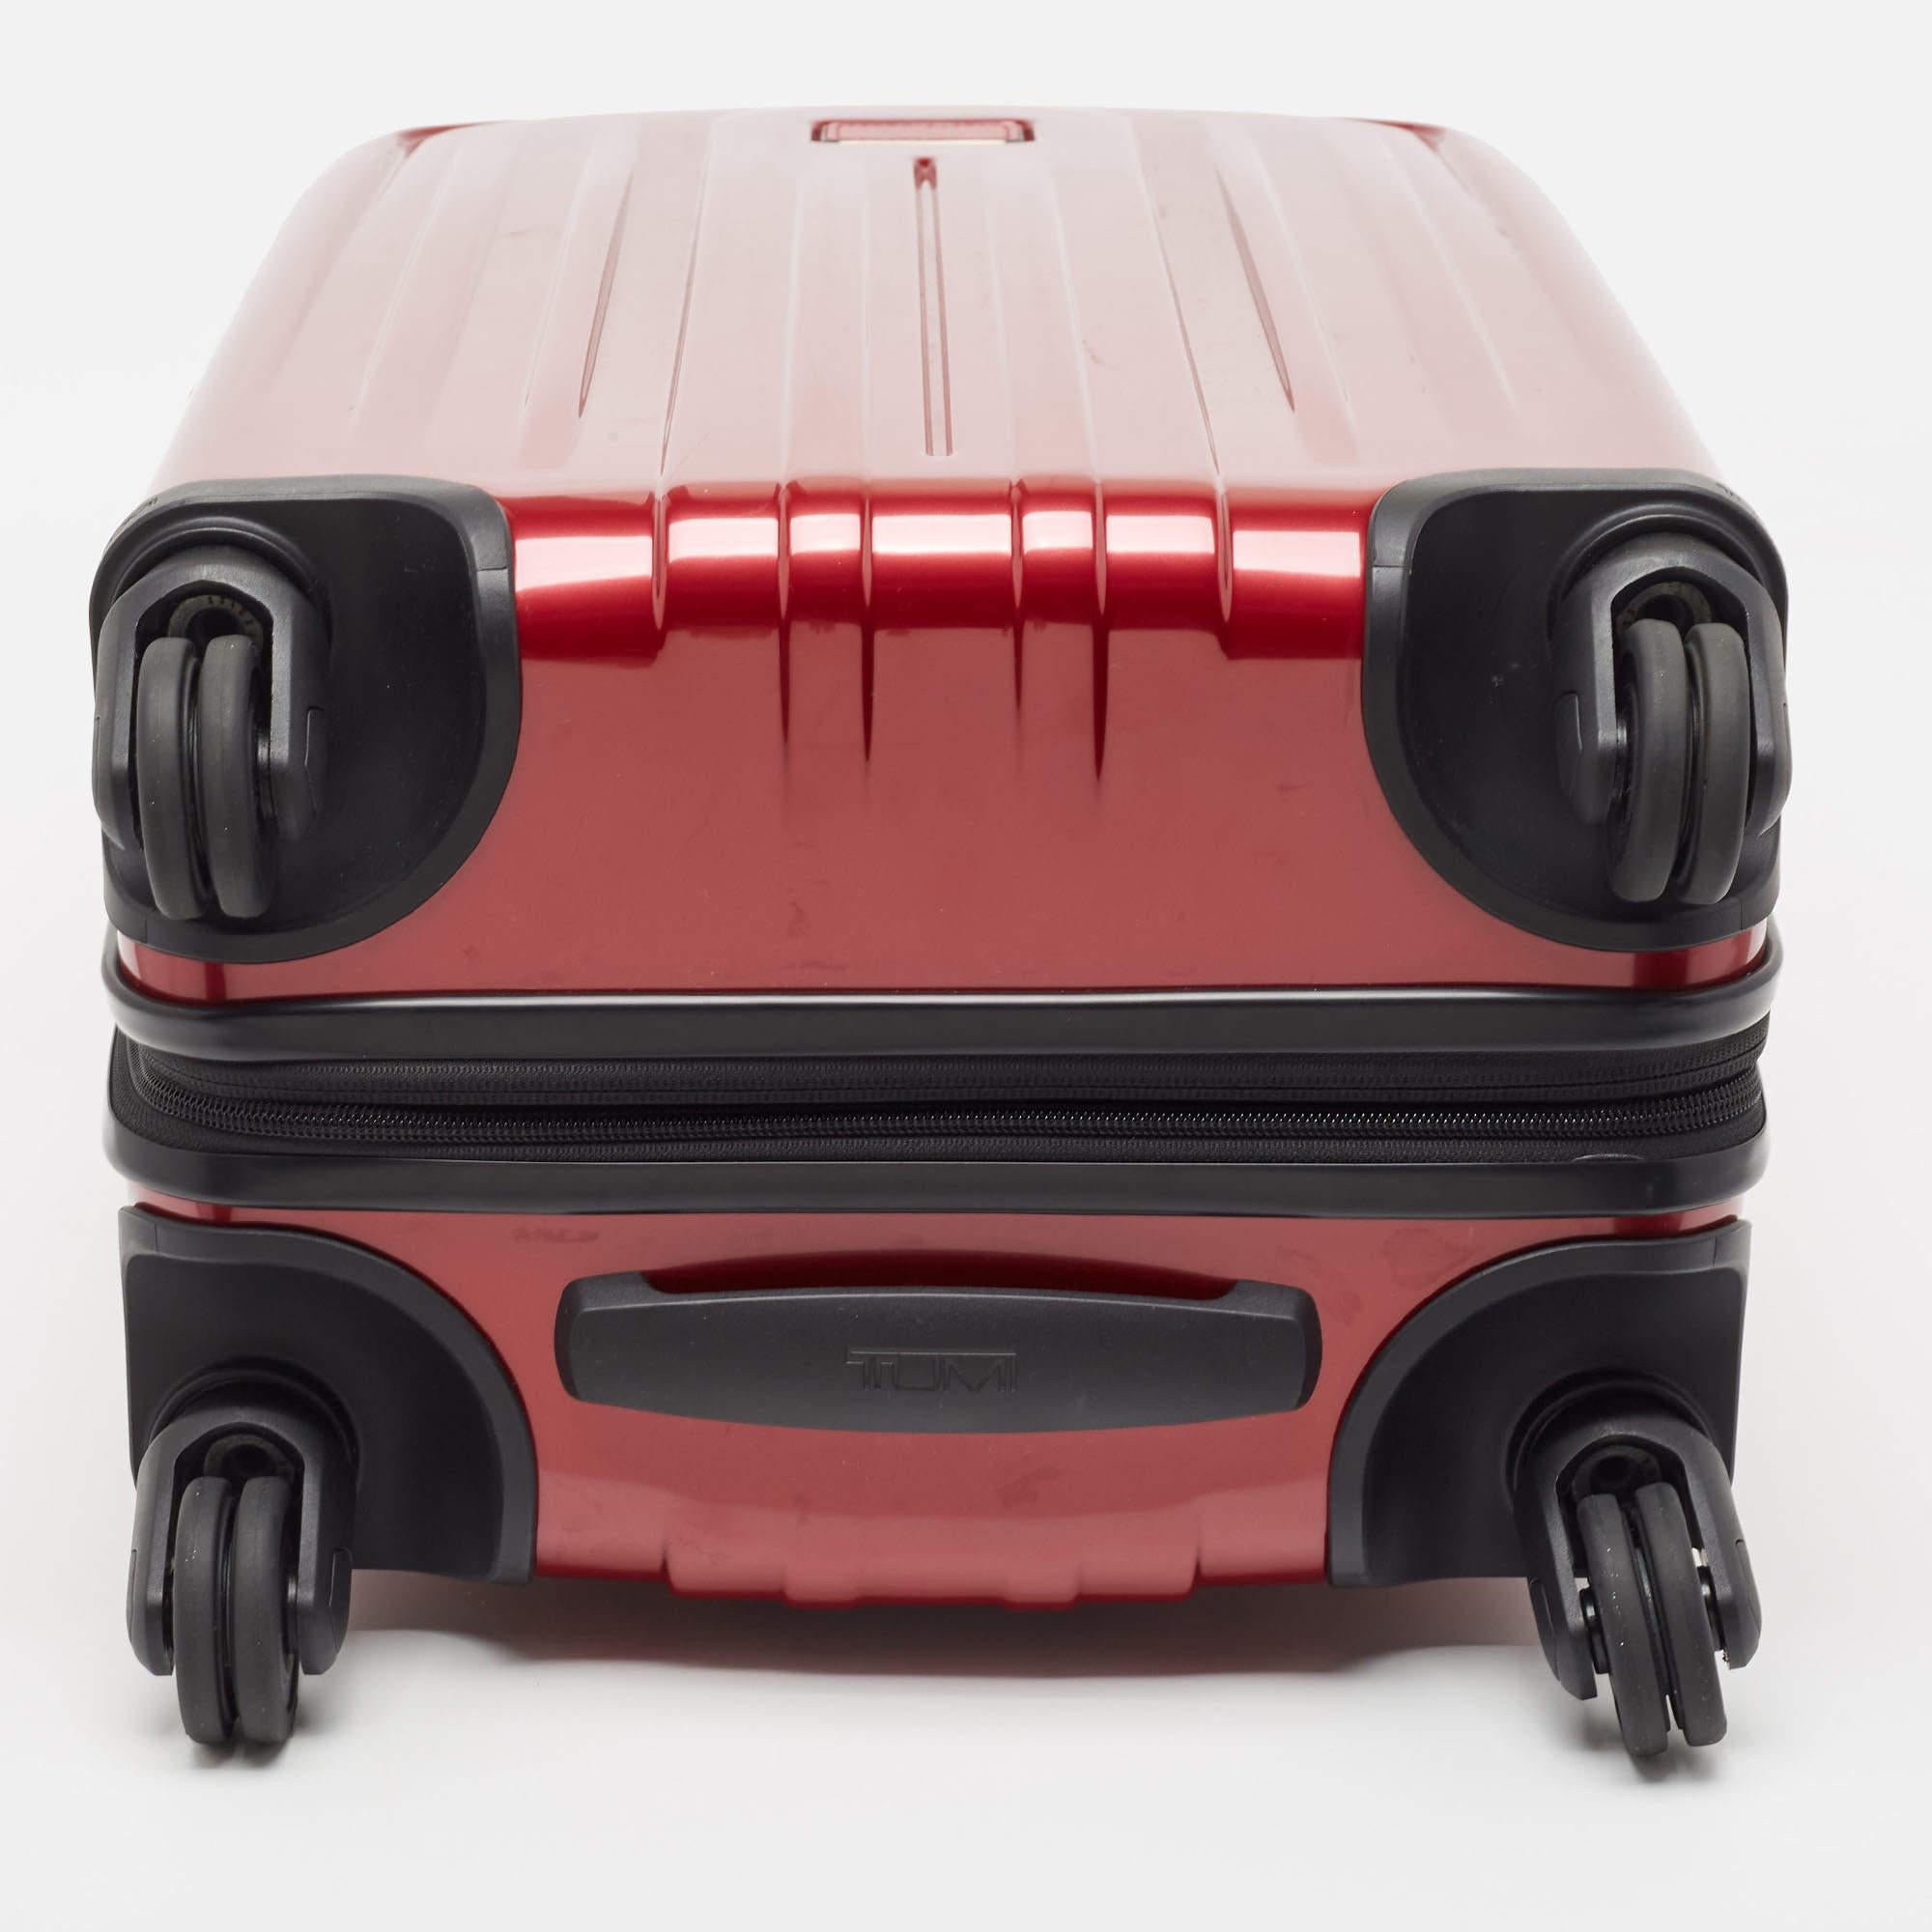 TUMI Red 4 Wheeled V4 International Expandable Carry On Luggage (Bagages à main extensibles à 4 roues) en vente 4